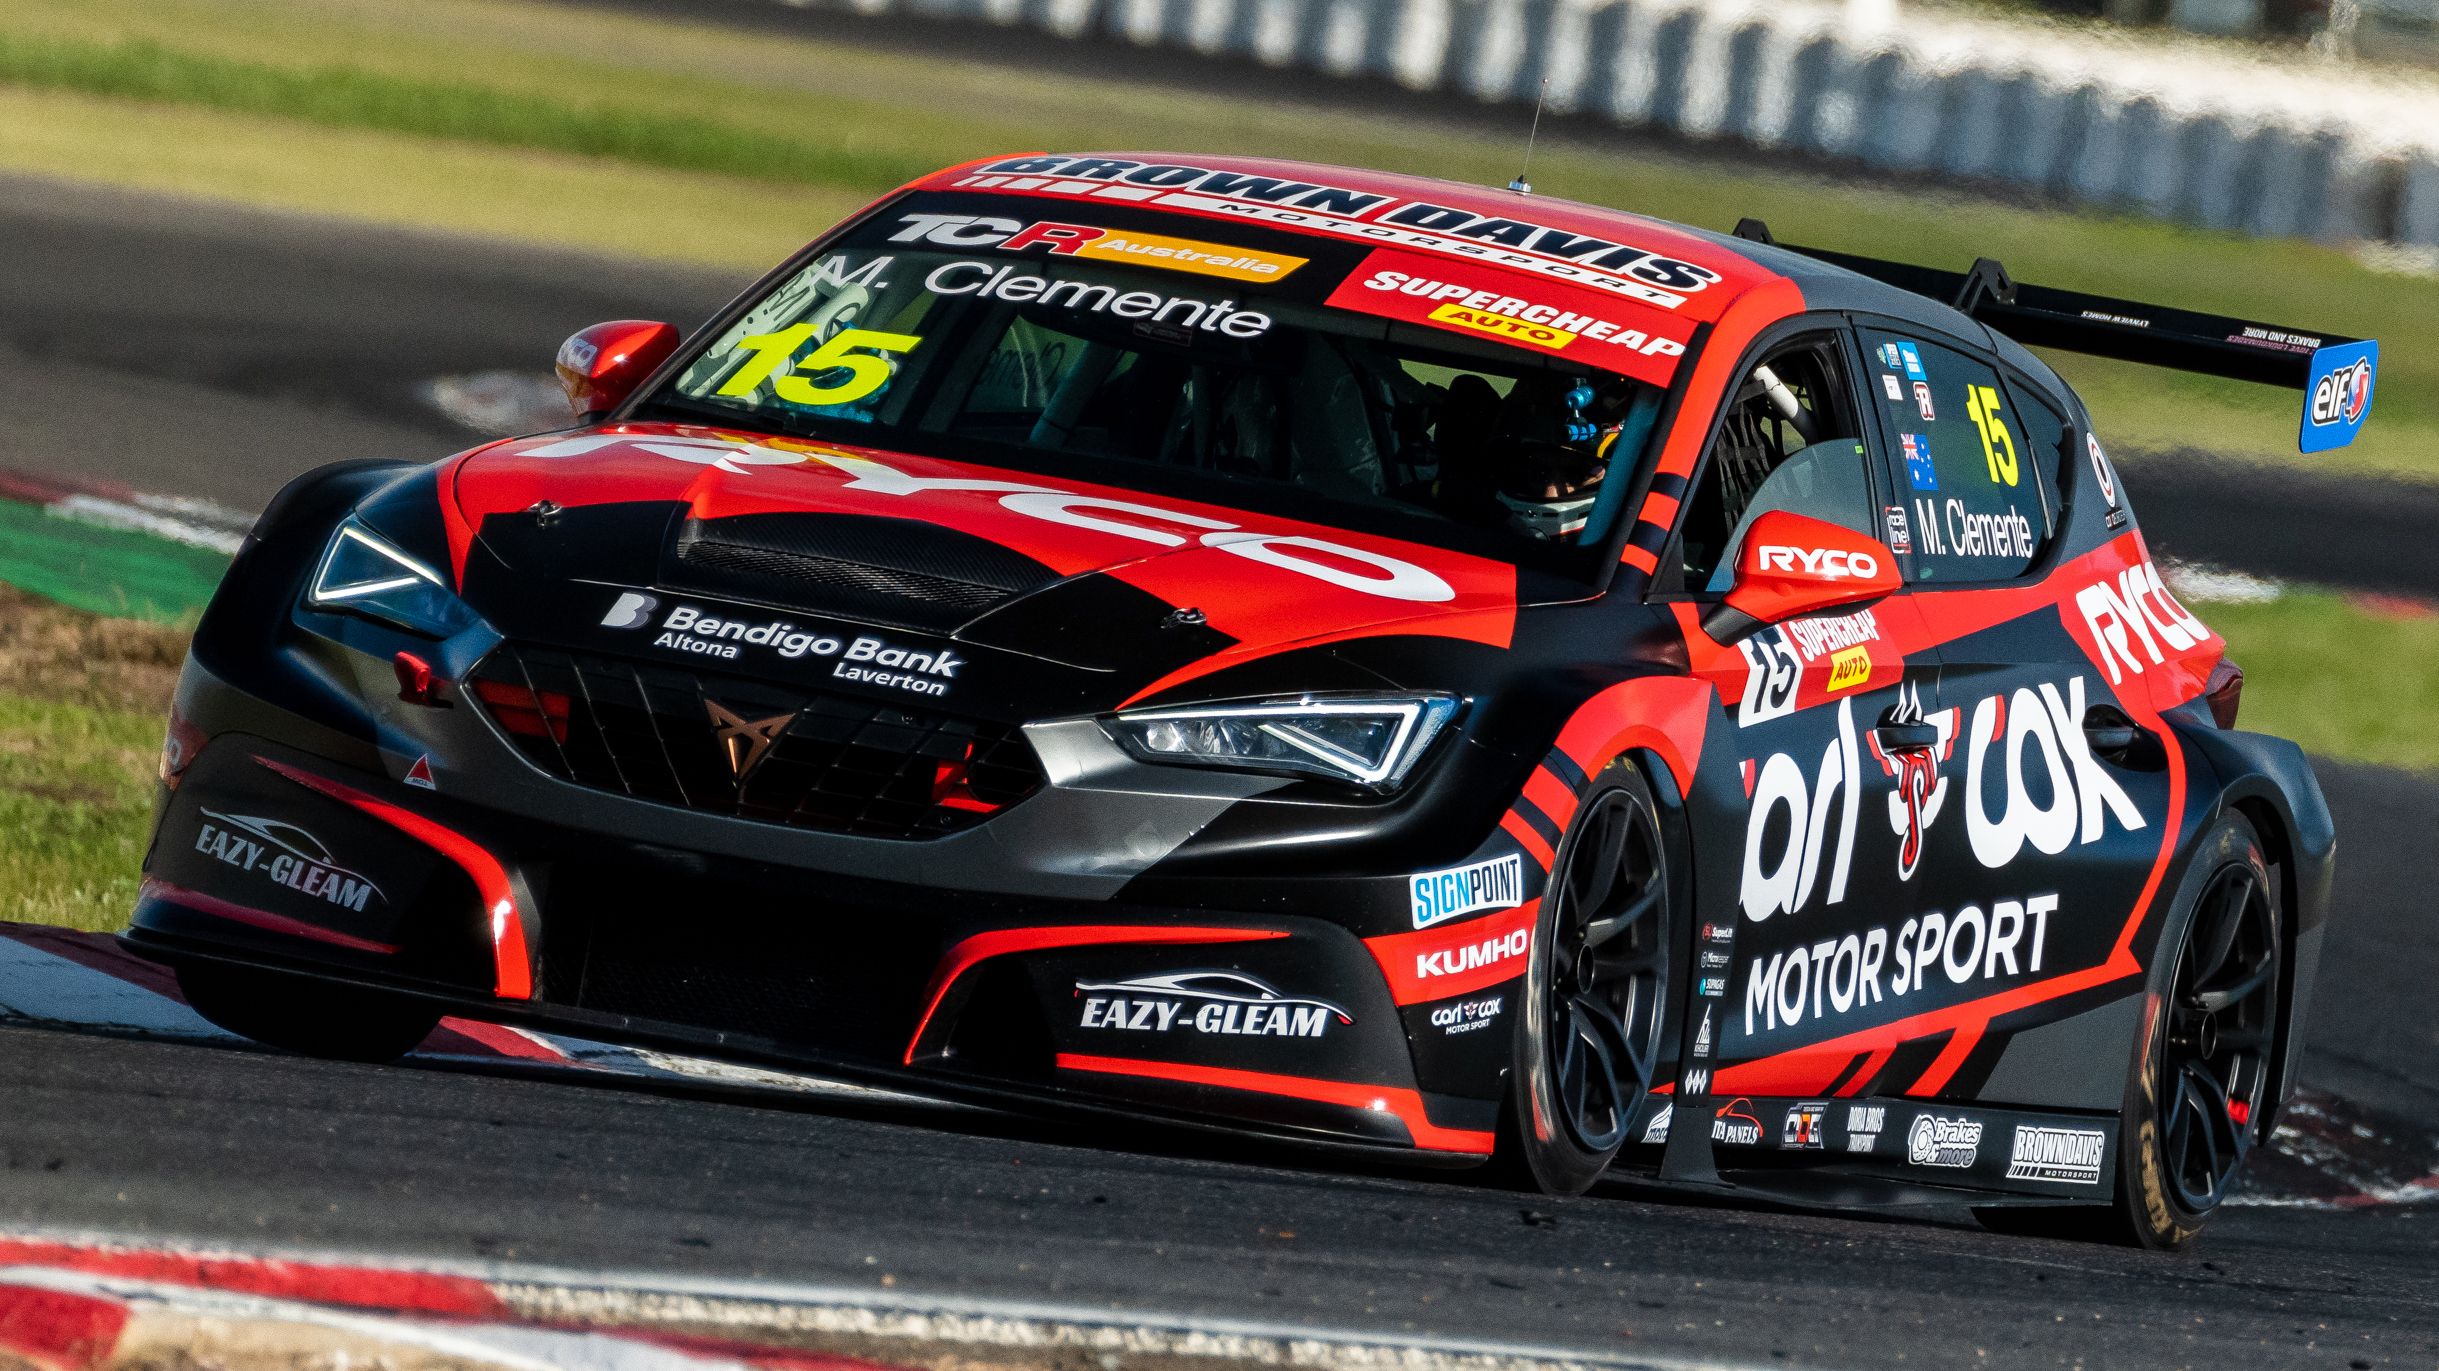 Michael Clemente won the weekend opener at Winton, launching himself into TCR Australia Series title contention.